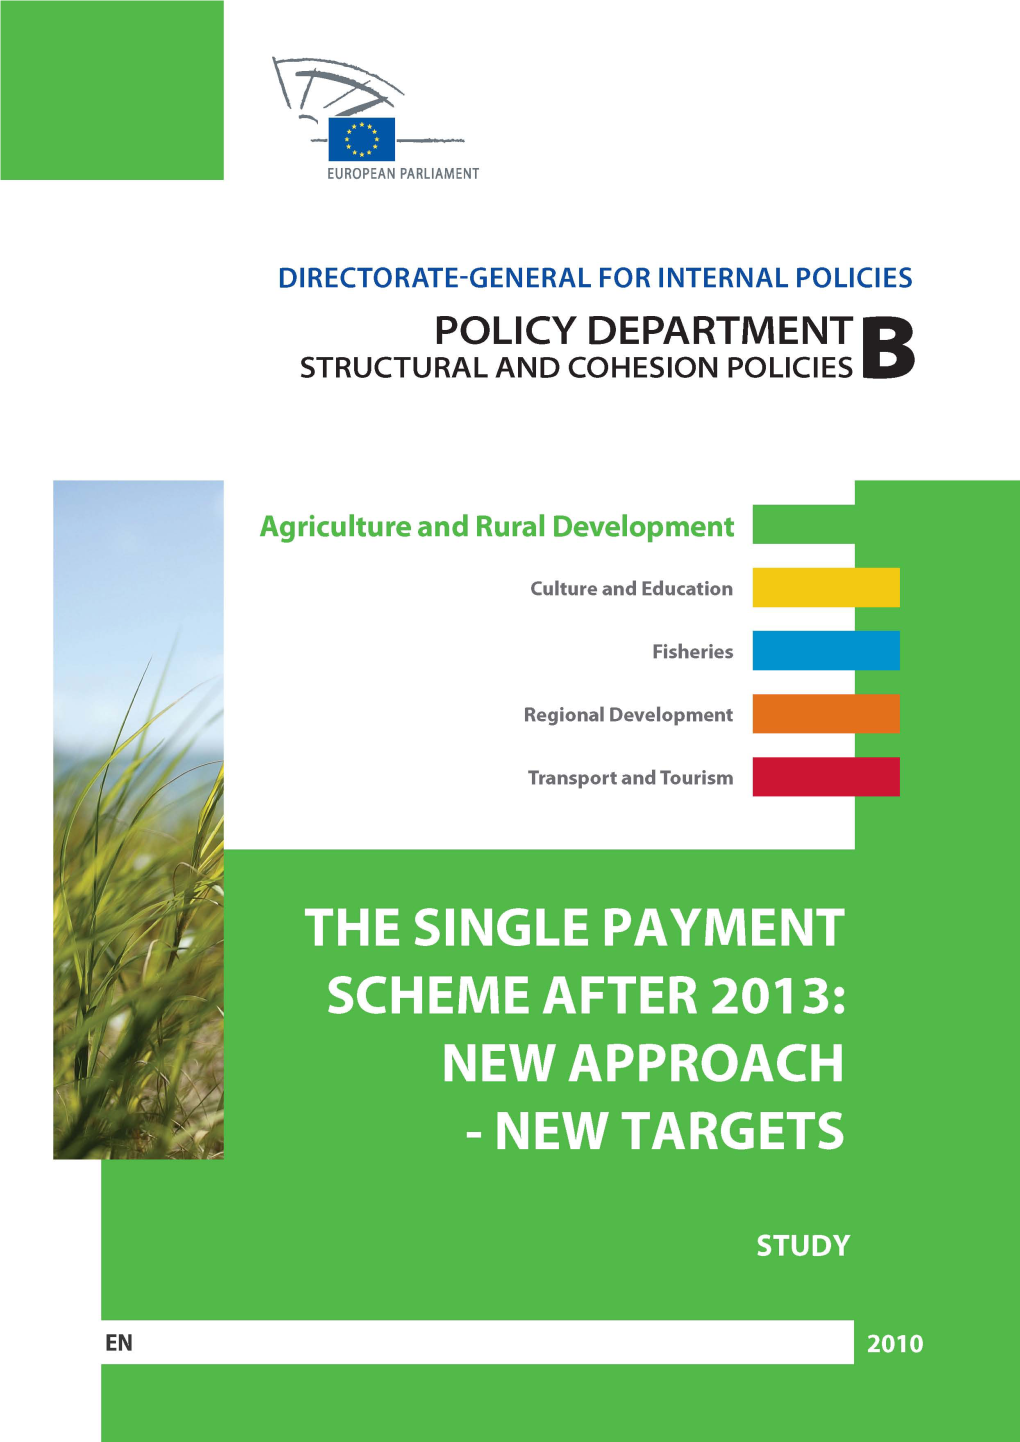 The Single Payment Scheme After 2013: New Approach-New Targets